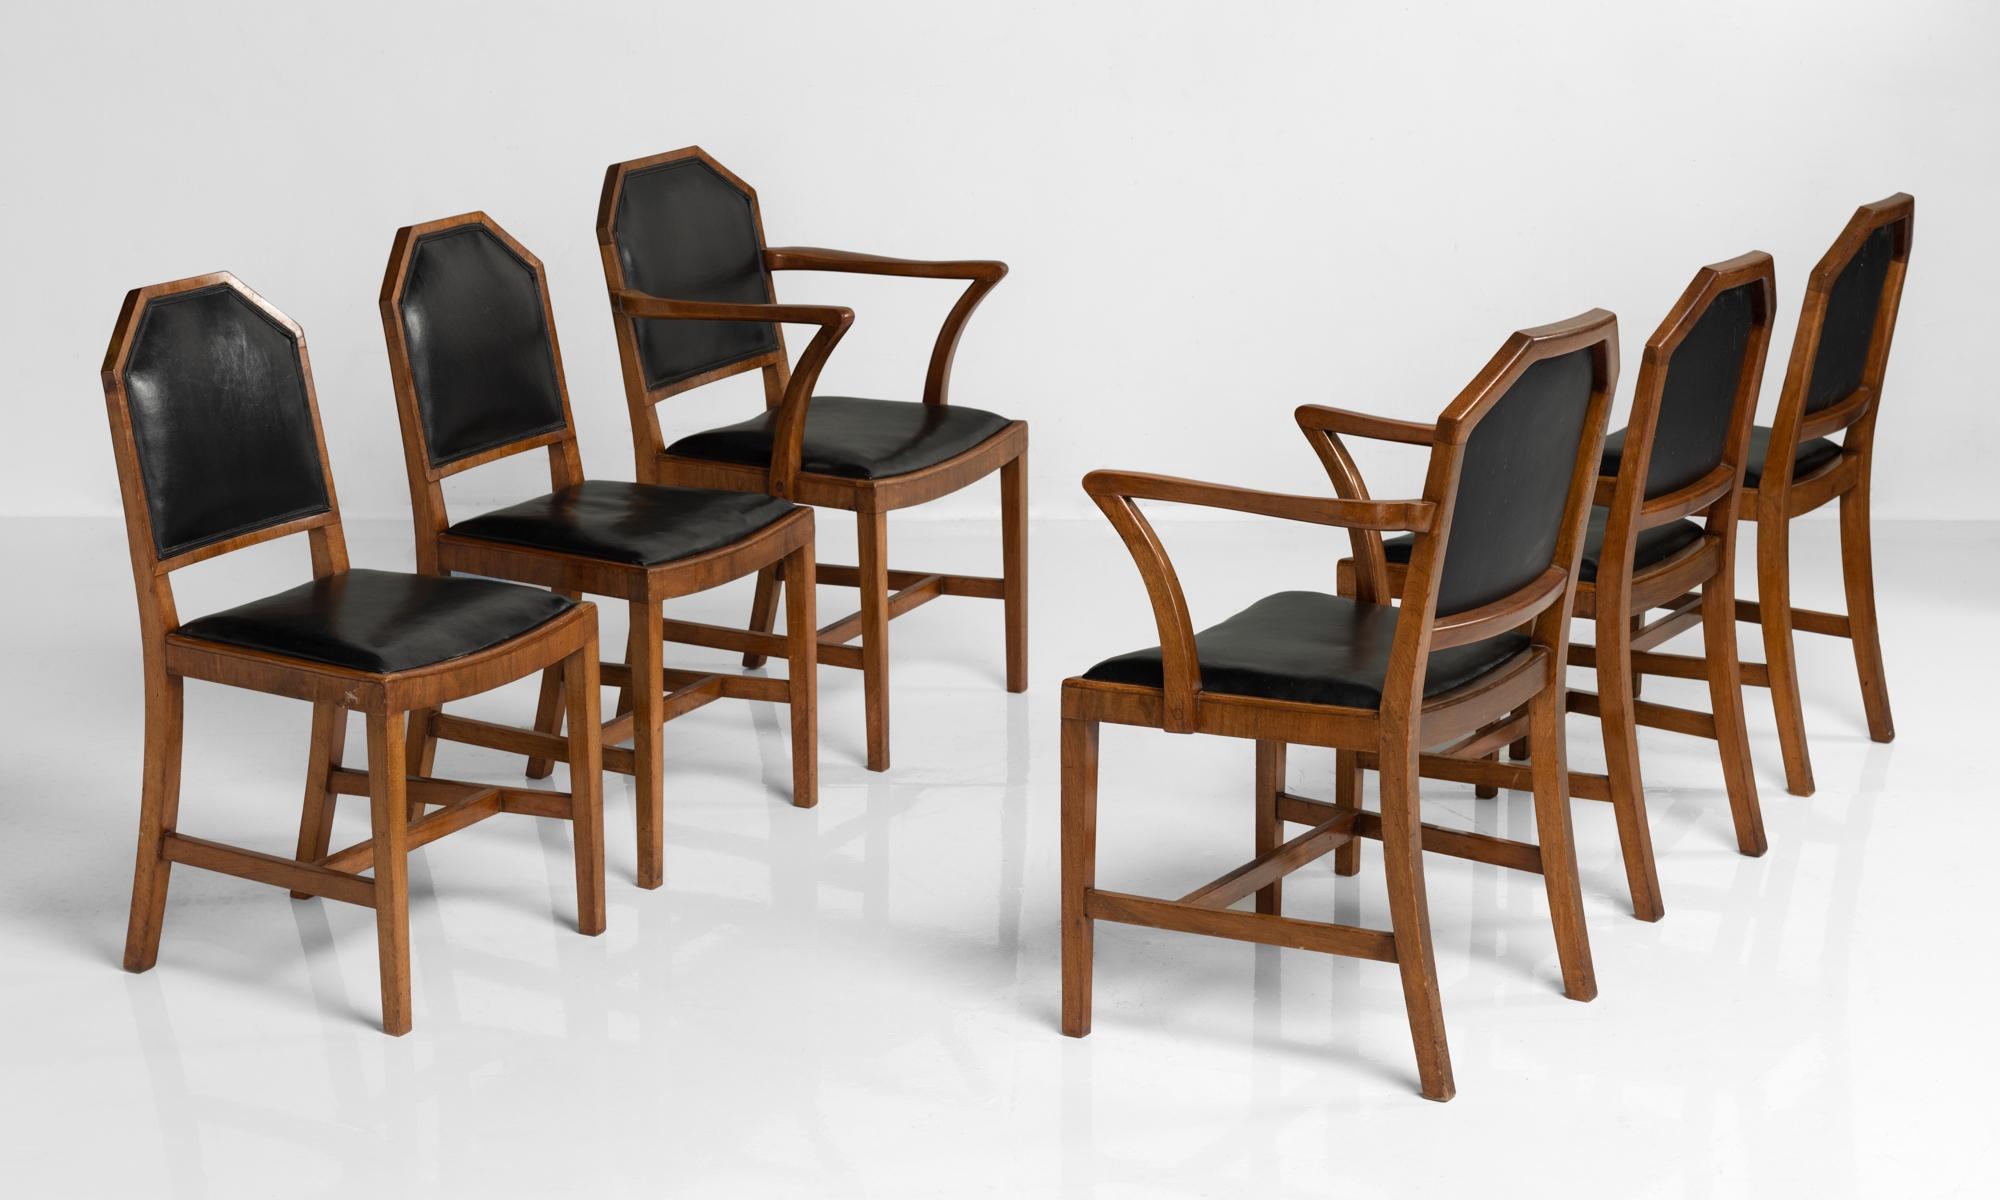 Walnut and leather dining chairs by Heals of London, England, circa 1915

Beautiful set of (6) dining chairs constructed in walnut, with original leather upholstery.

Measures: 21.5” W x 21.5” D x 34.5” H x 17.5” seat, arm Height 28”.